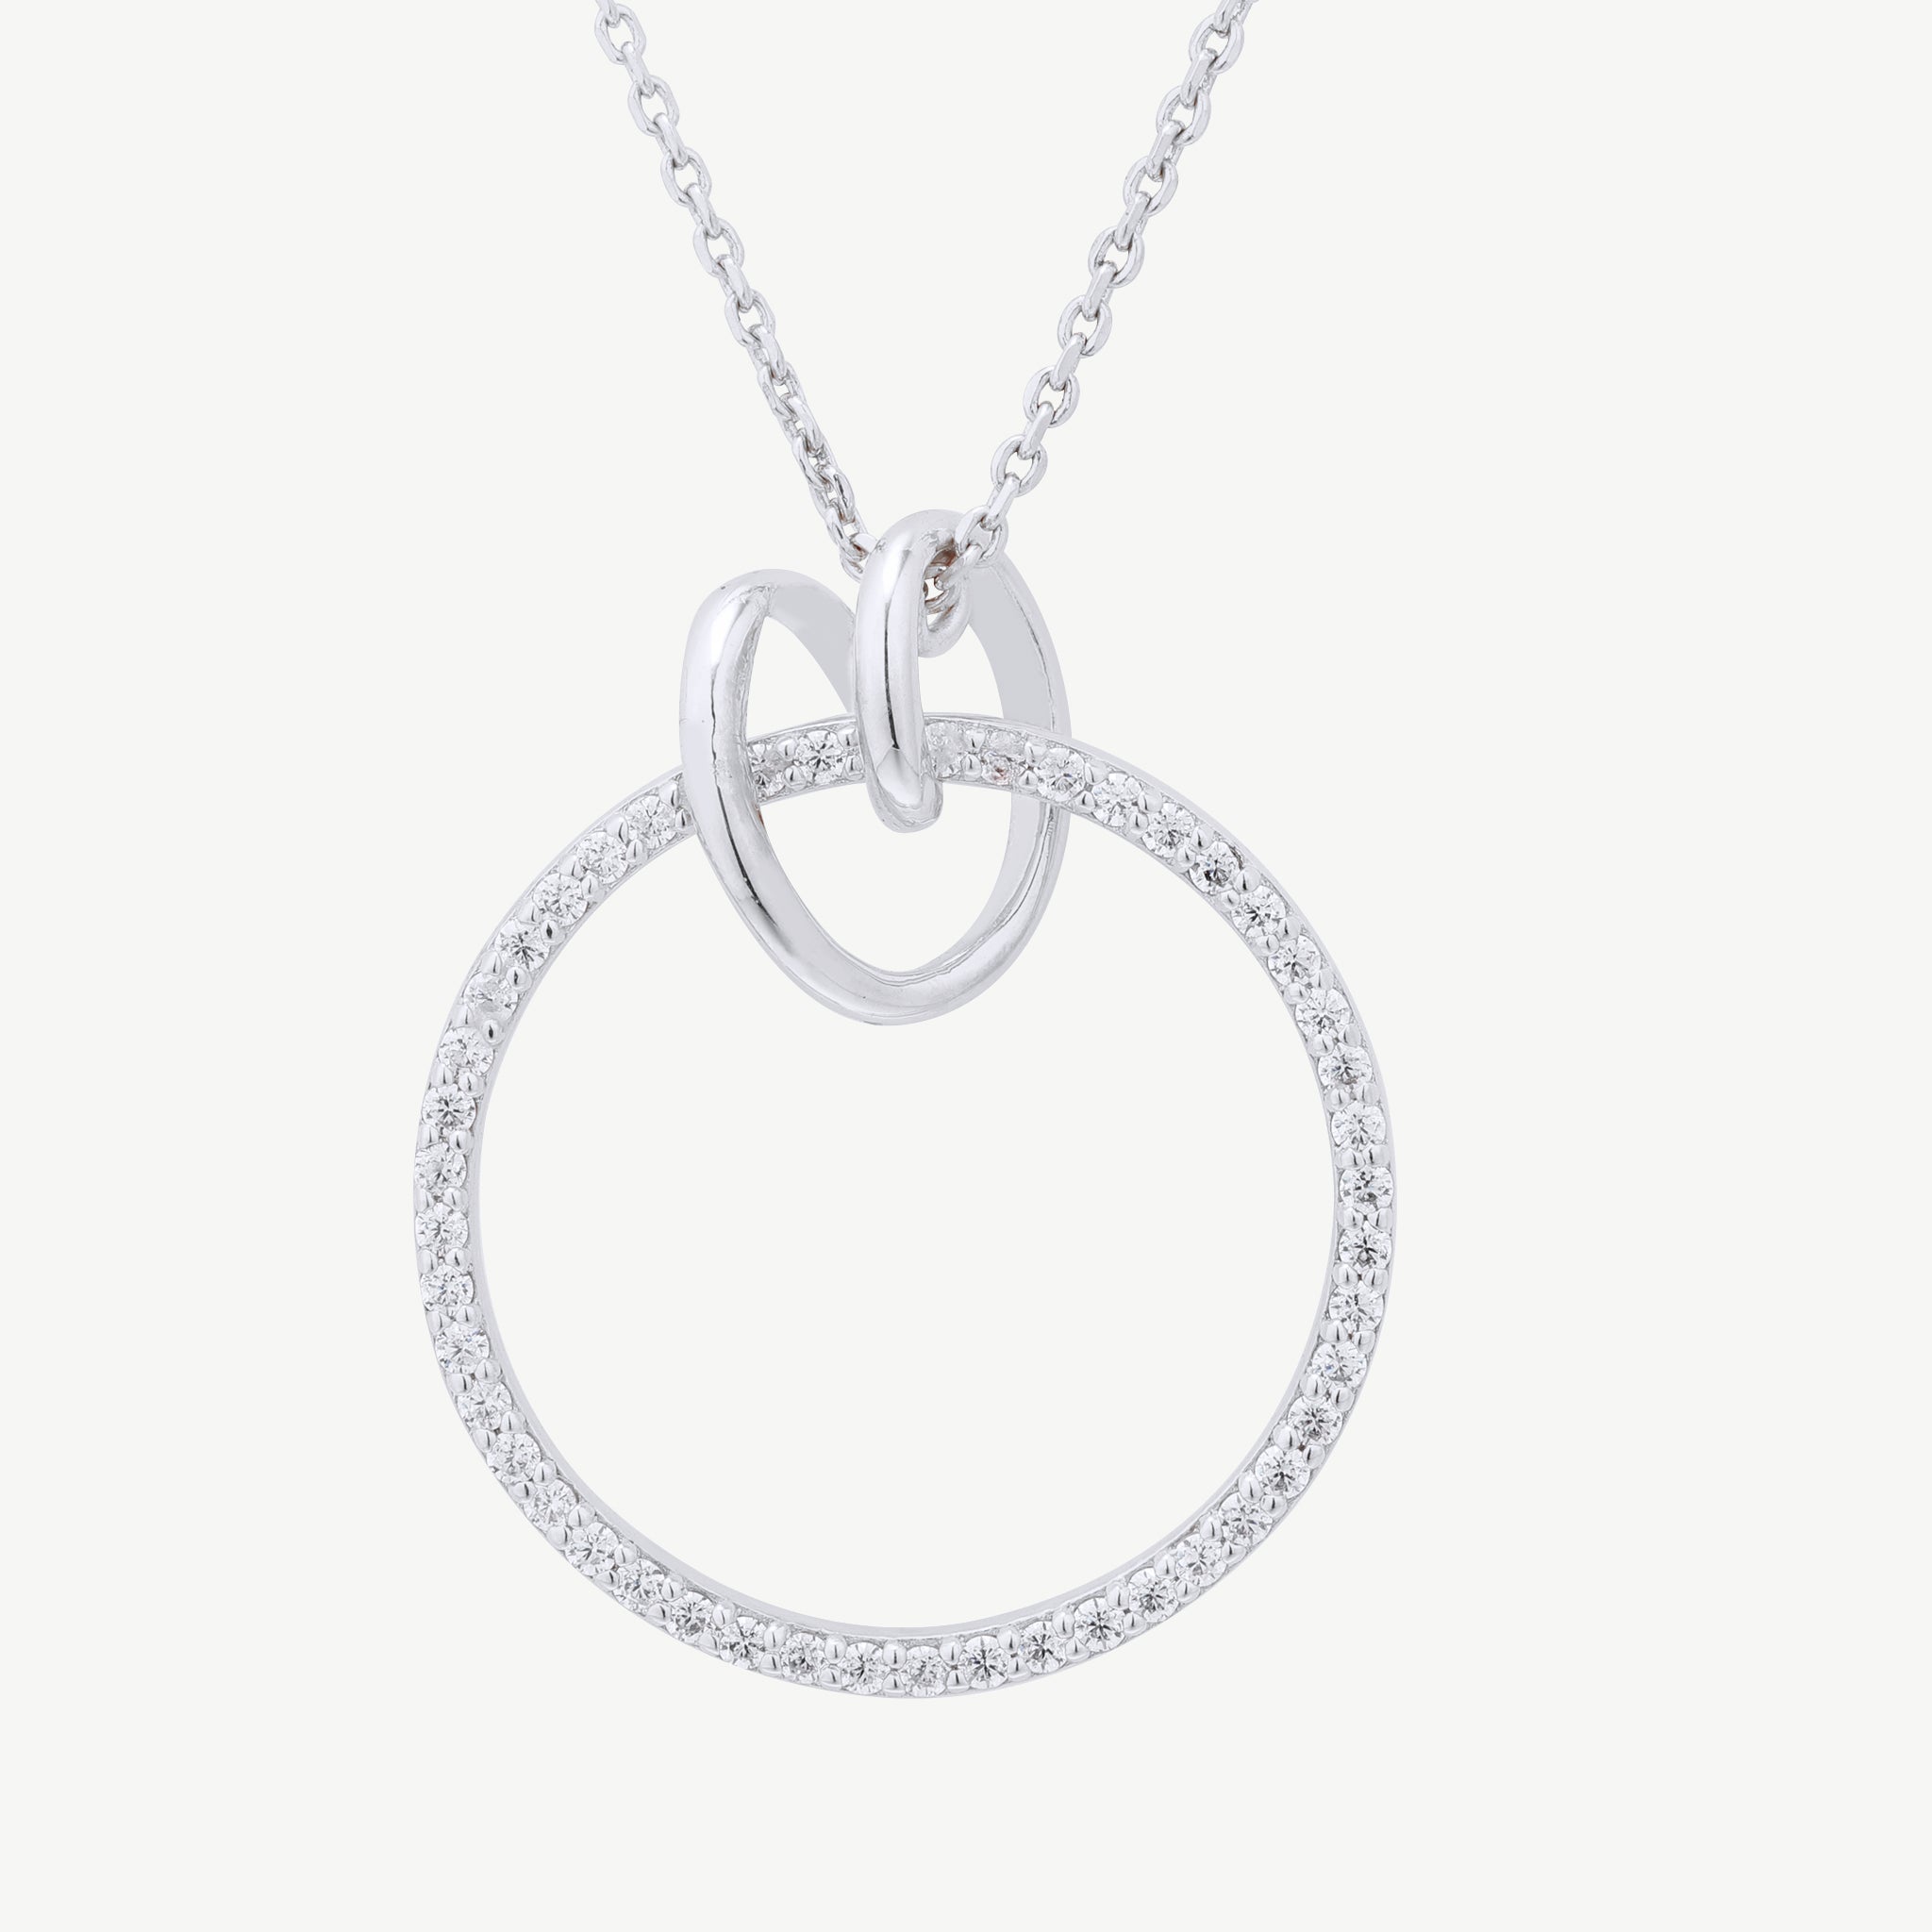 Shimmering Substance Silver Necklace